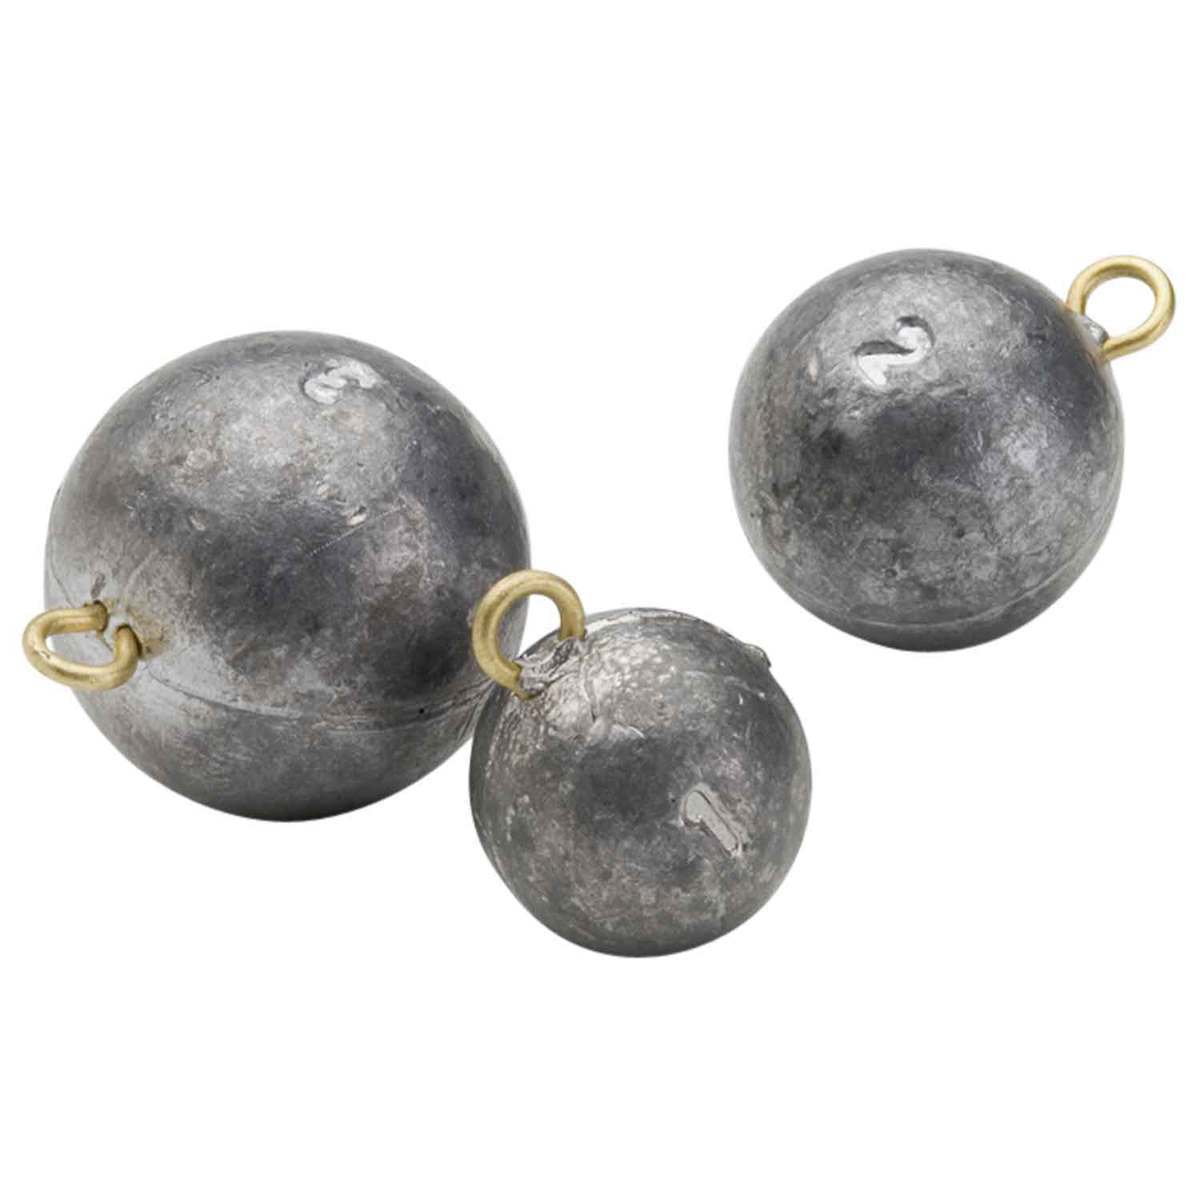 Bullet Weights Cannon Ball 4 oz, 2 Sinkers, Natuarl